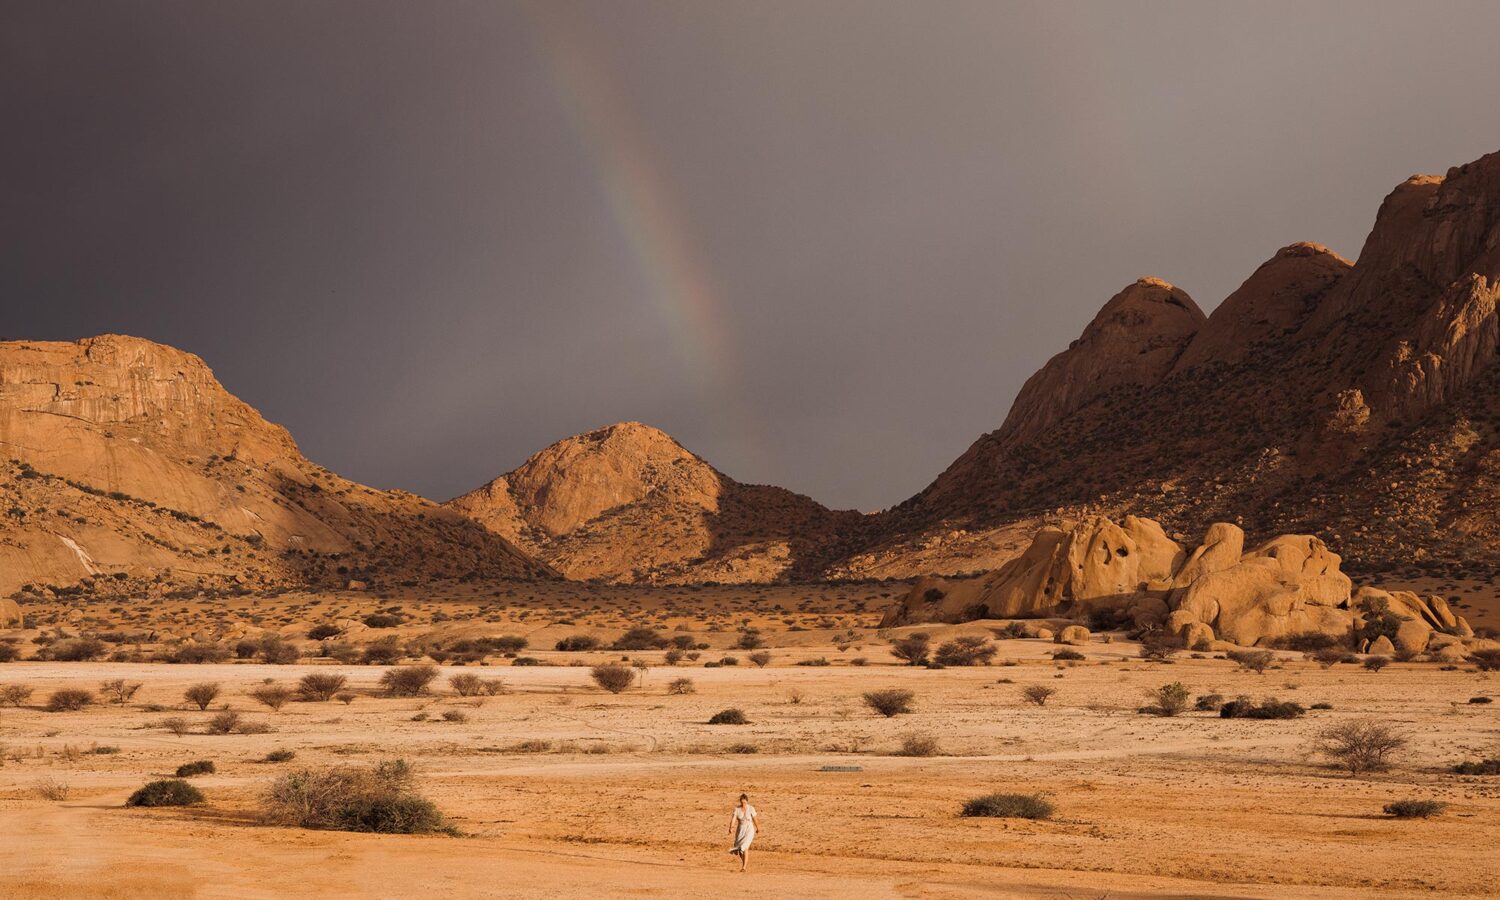 A rainbow welcomes us walking through the desert landscapes from our clamping cabin at the Spitkoppen lodge